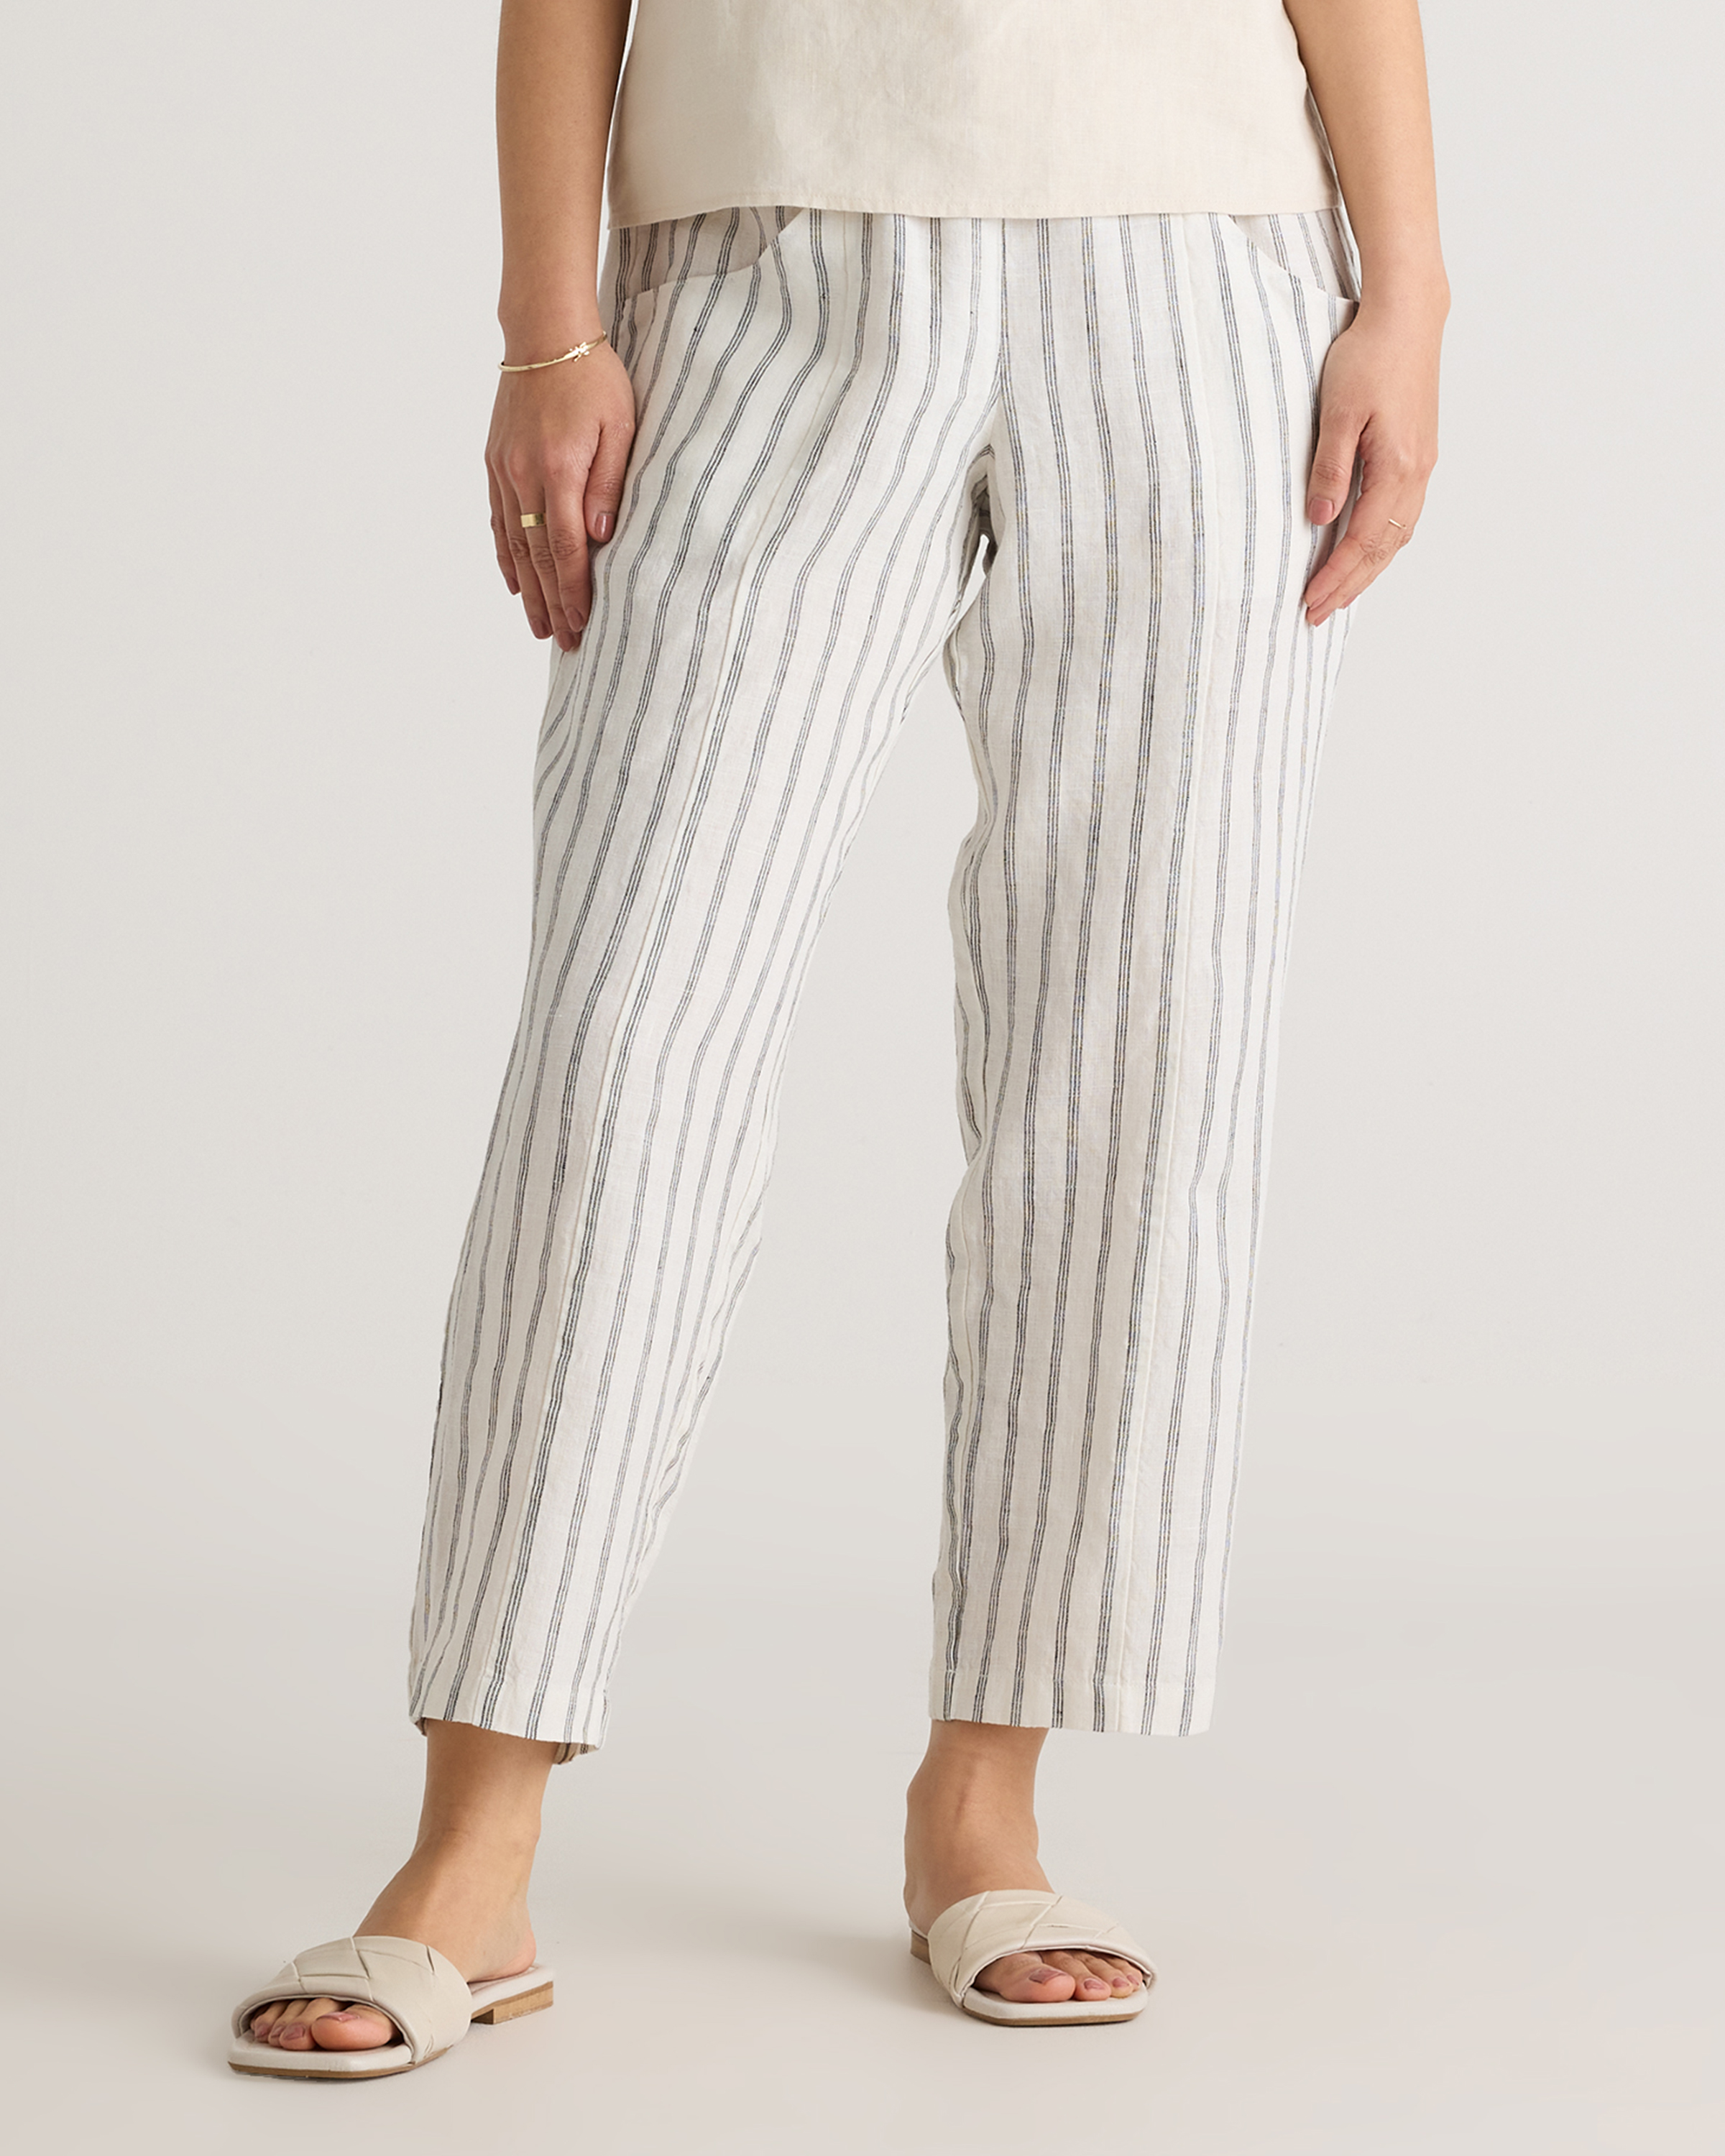 Shop Quince Women's 100% European Linen Tapered Ankle Pants In Oatmeal / Black Stripe